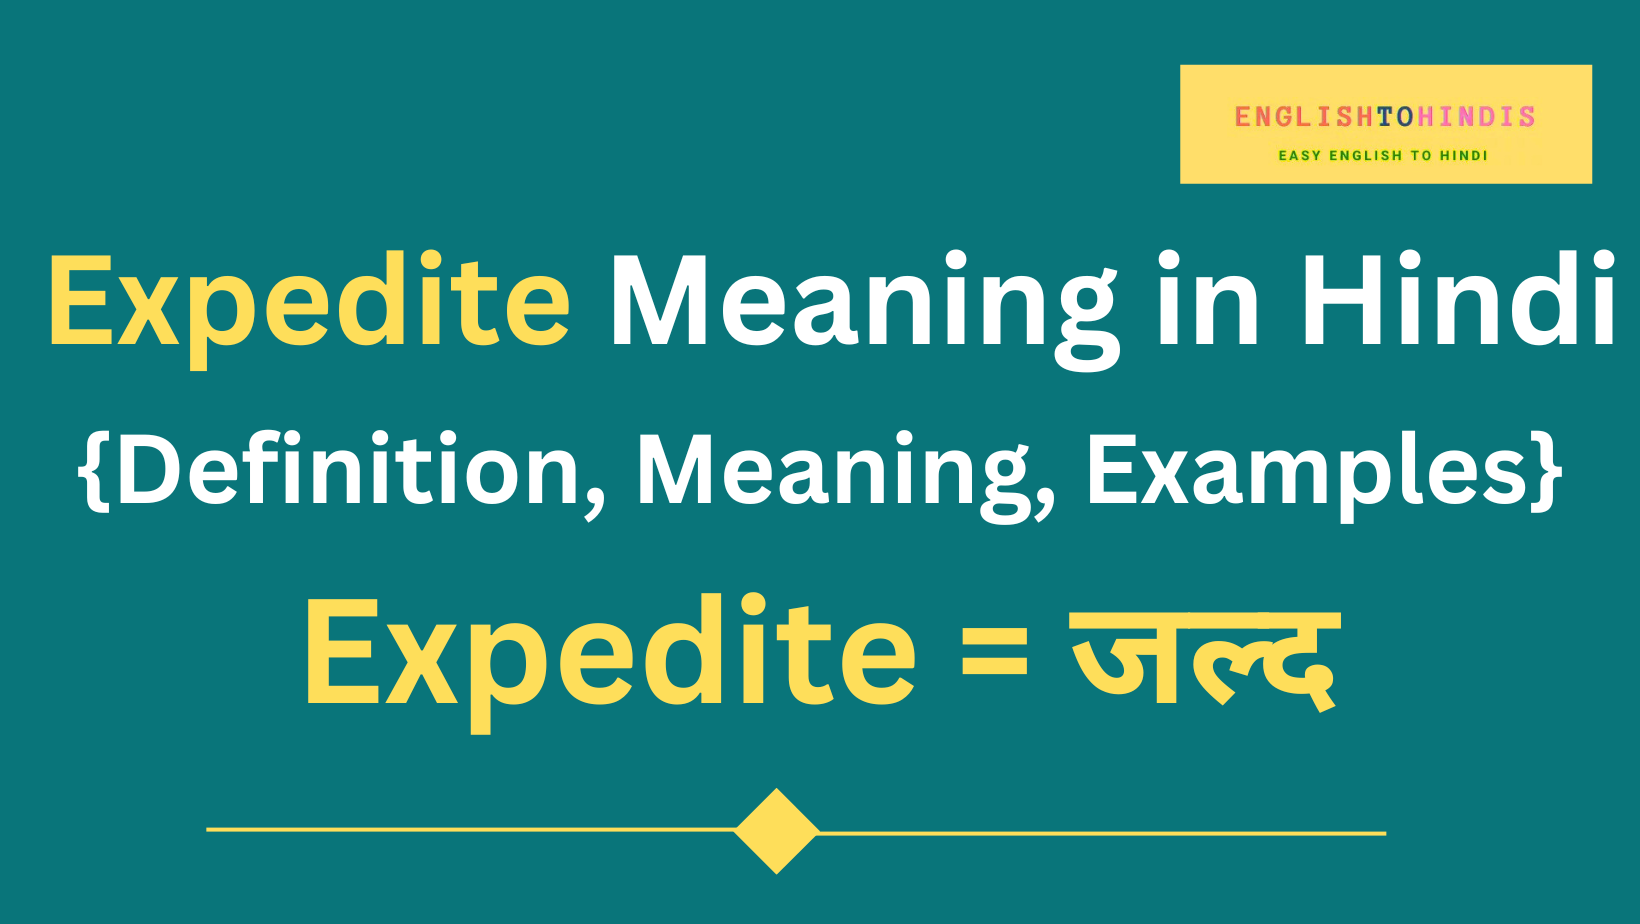 Expedite Meaning in Hindi